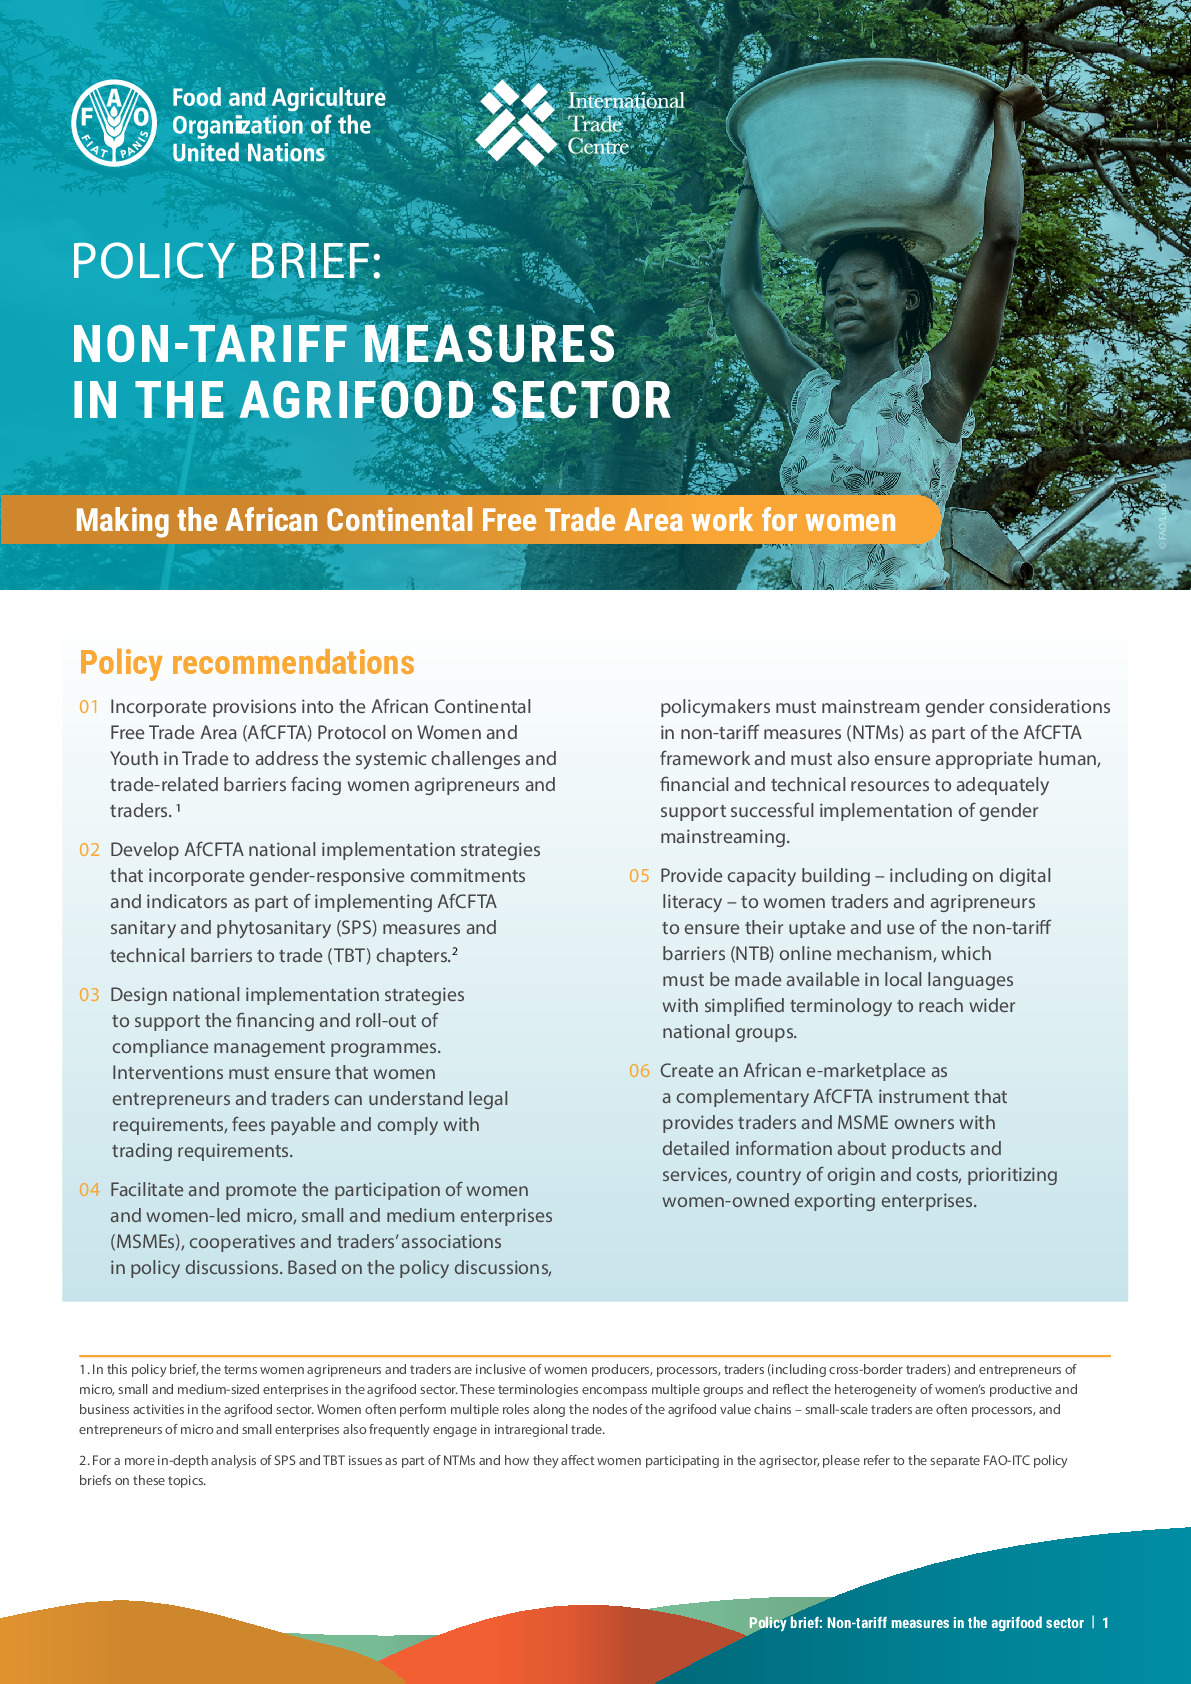 fao-itc_policy_brief_ntm_agrofood